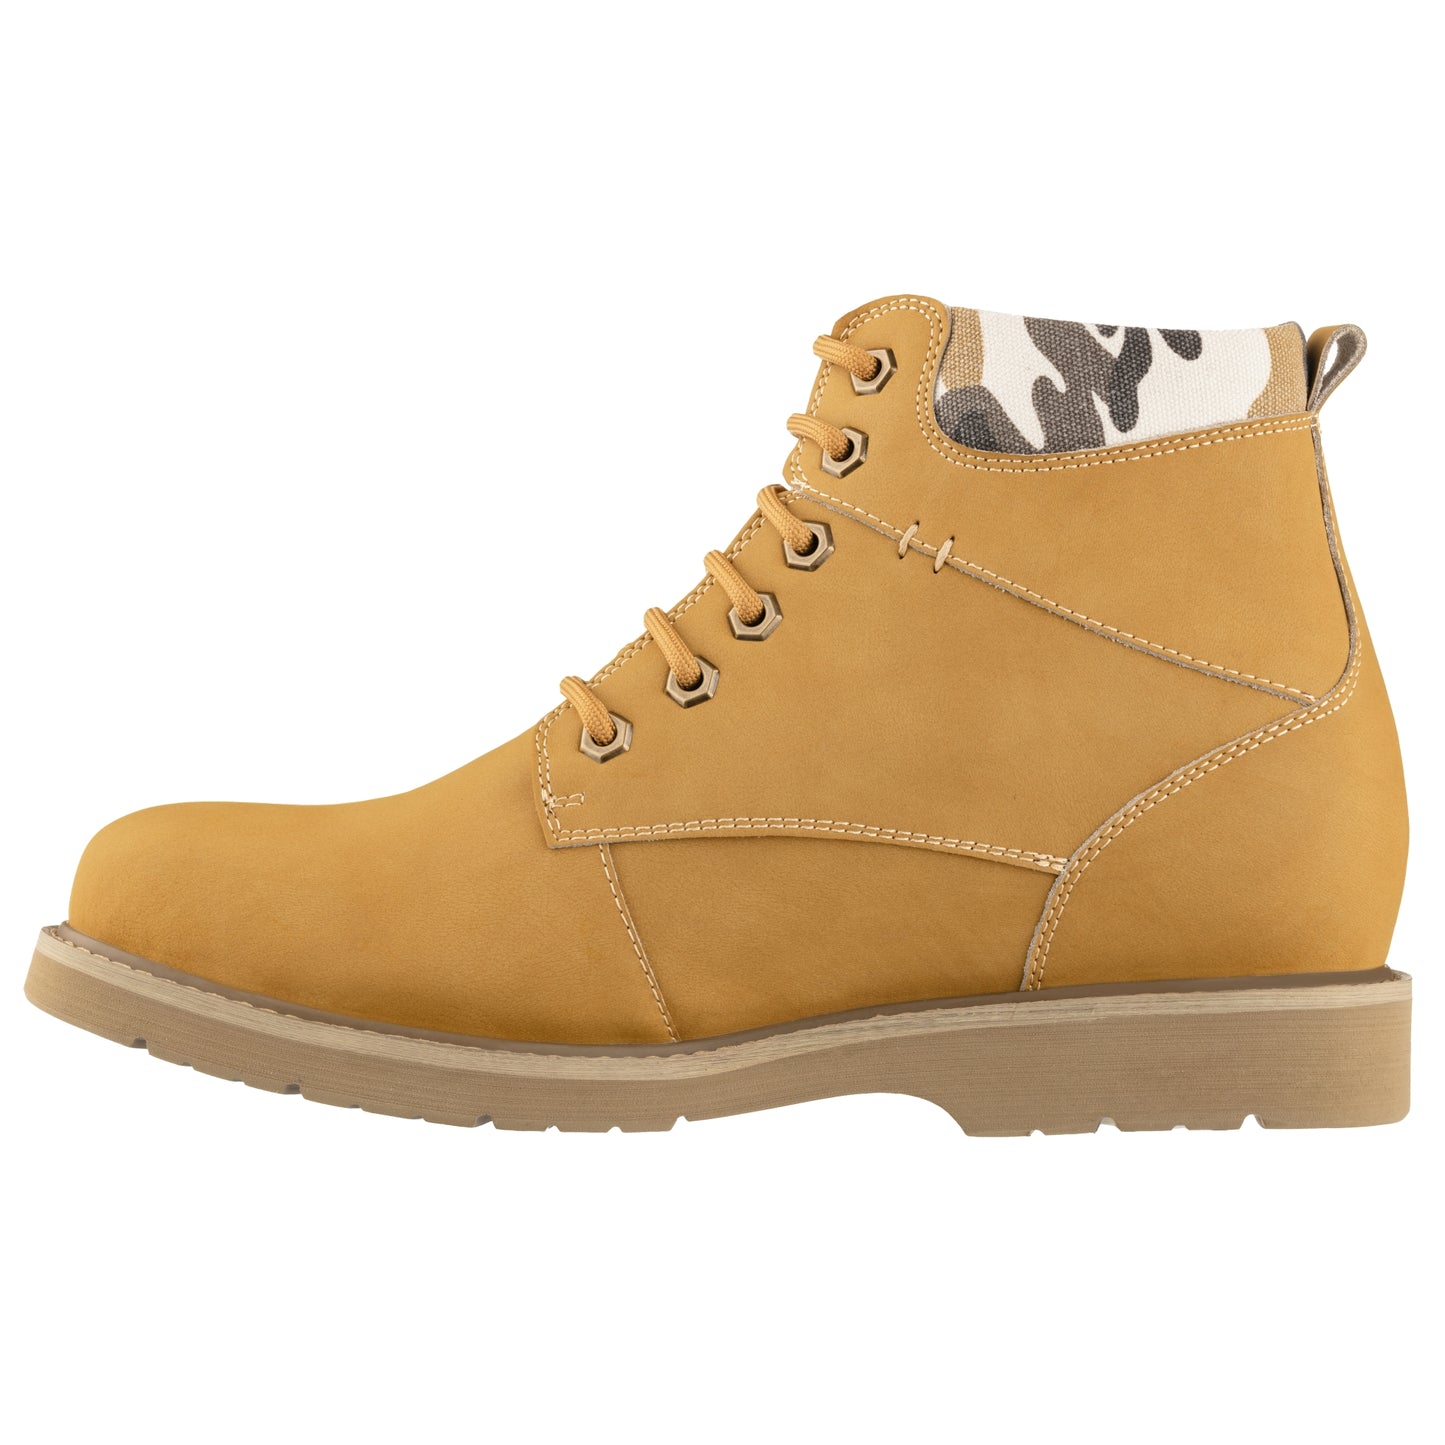 Elevator shoes height increase CALTO - YH7830 - 3.2 Inches (Khaki) - Nubuck Boots